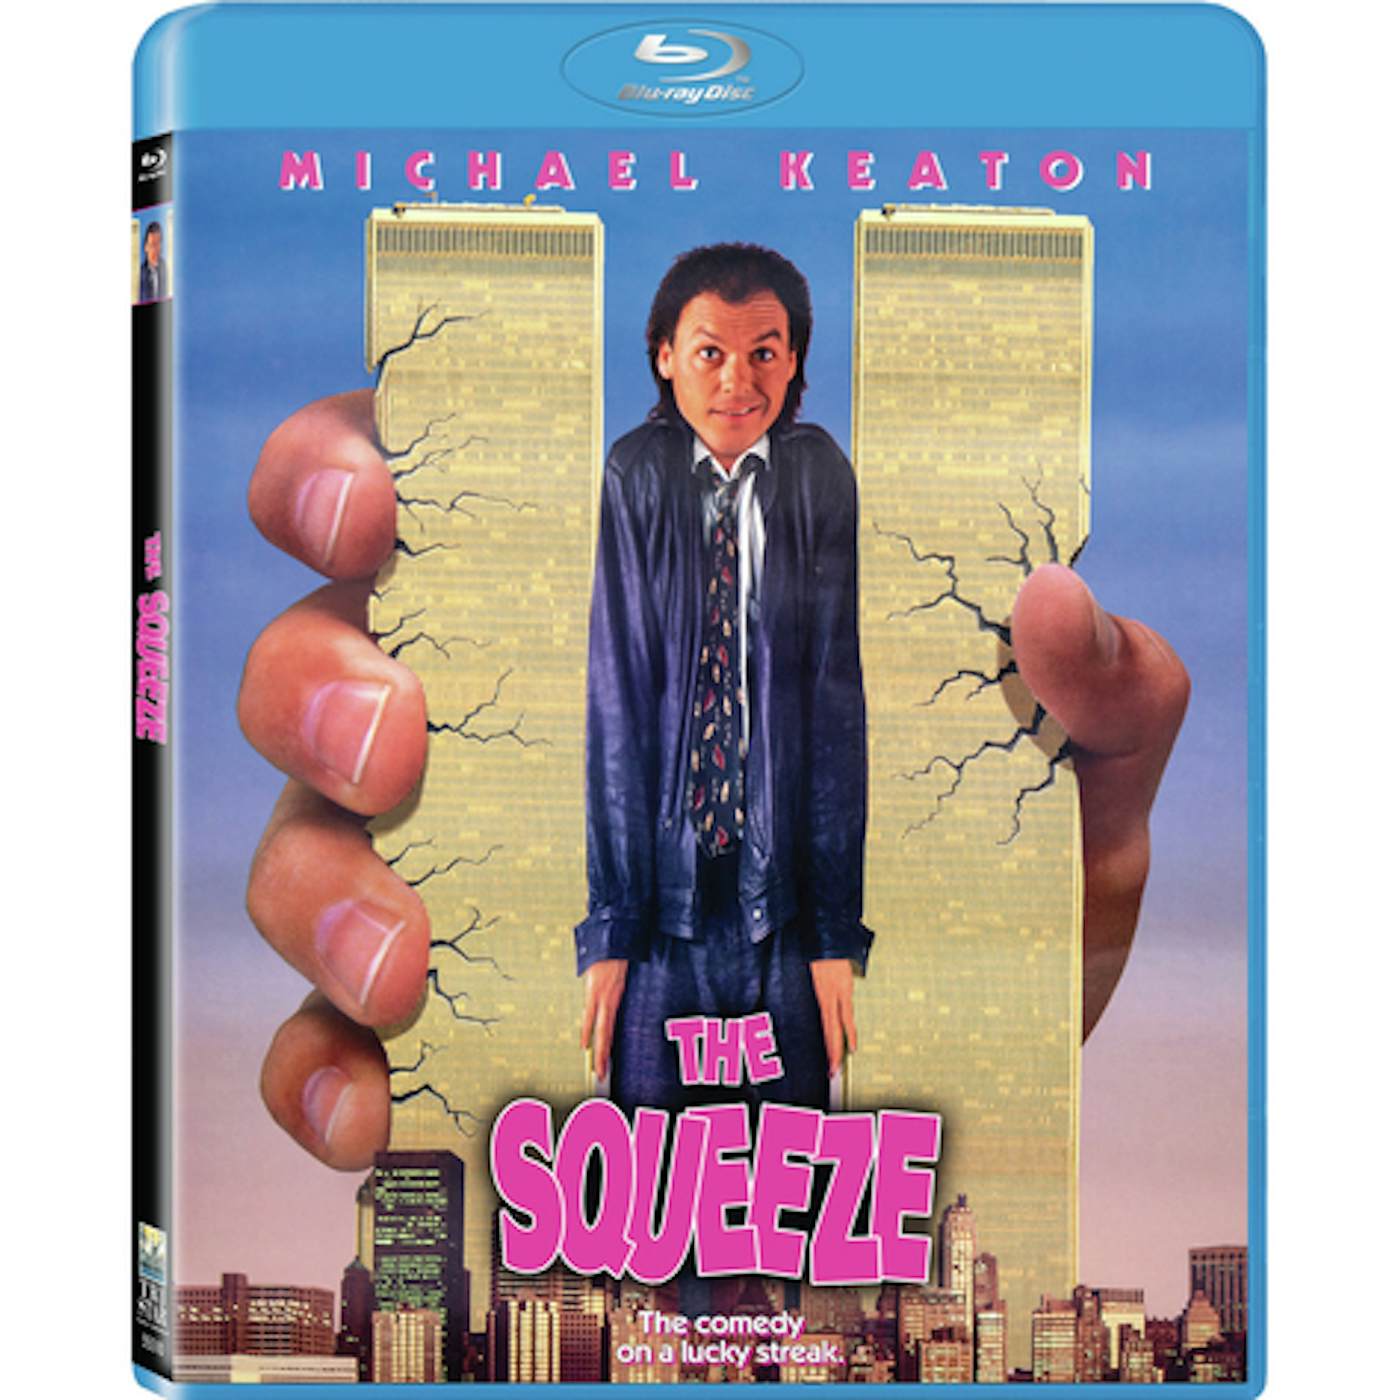 SQUEEZE Blu-ray